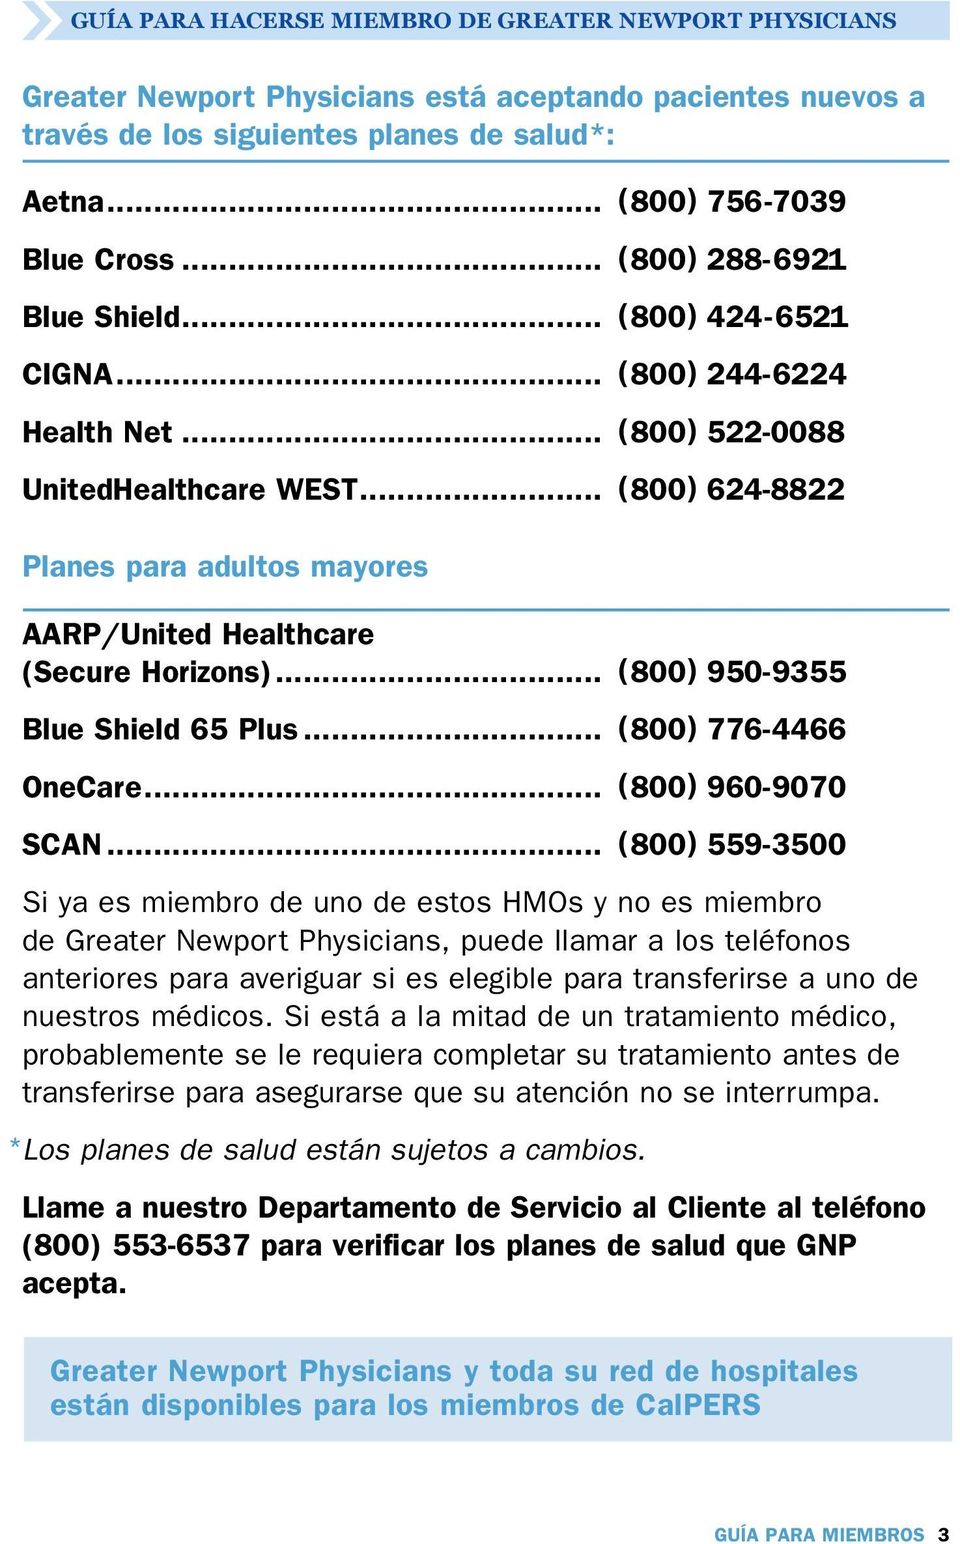 .. (800) 624-8822 Planes para adultos mayores AARP/United Healthcare (Secure Horizons)... (800) 950-9355 Blue Shield 65 Plus... (800) 776-4466 OneCare... (800) 960-9070 SCAN.